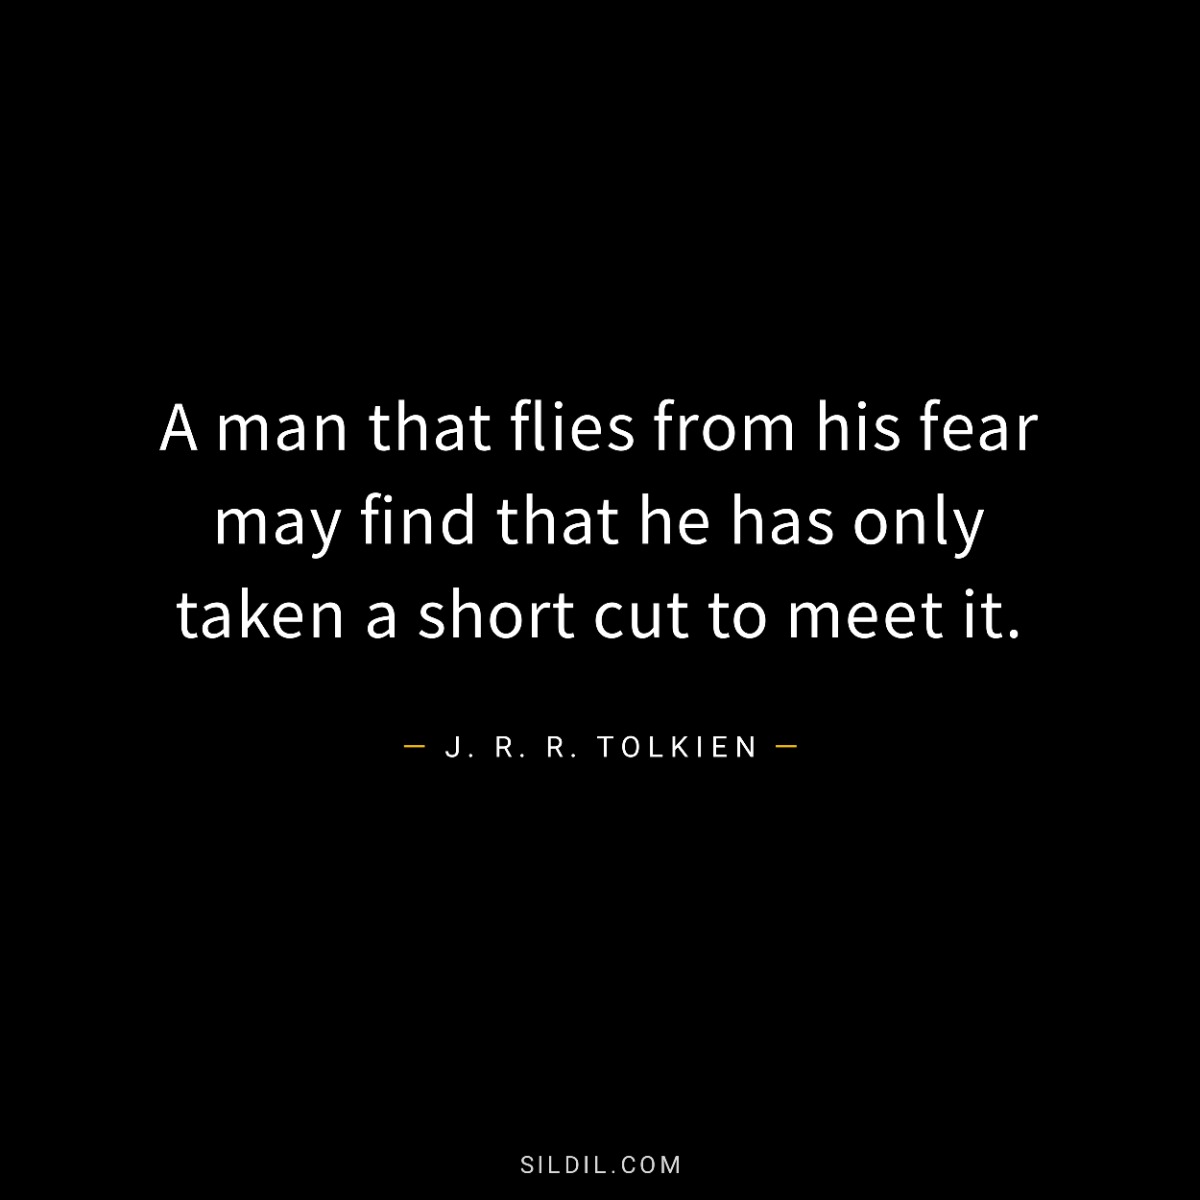 A man that flies from his fear may find that he has only taken a short cut to meet it.